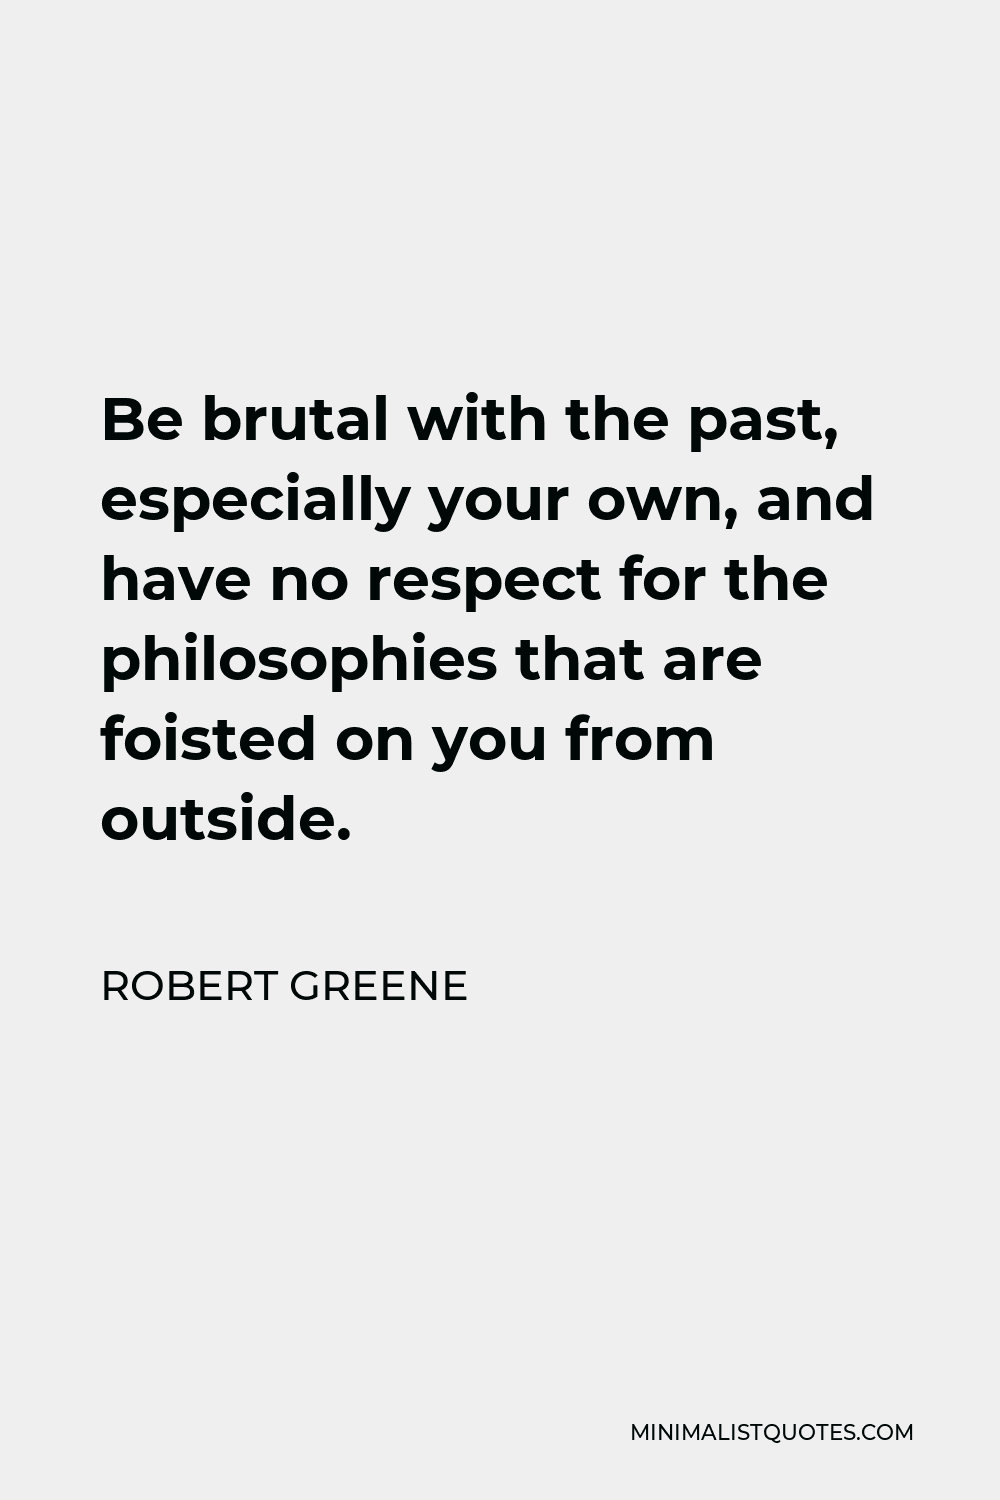 Robert Greene Quote - Be brutal with the past, especially your own, and have no respect for the philosophies that are foisted on you from outside.